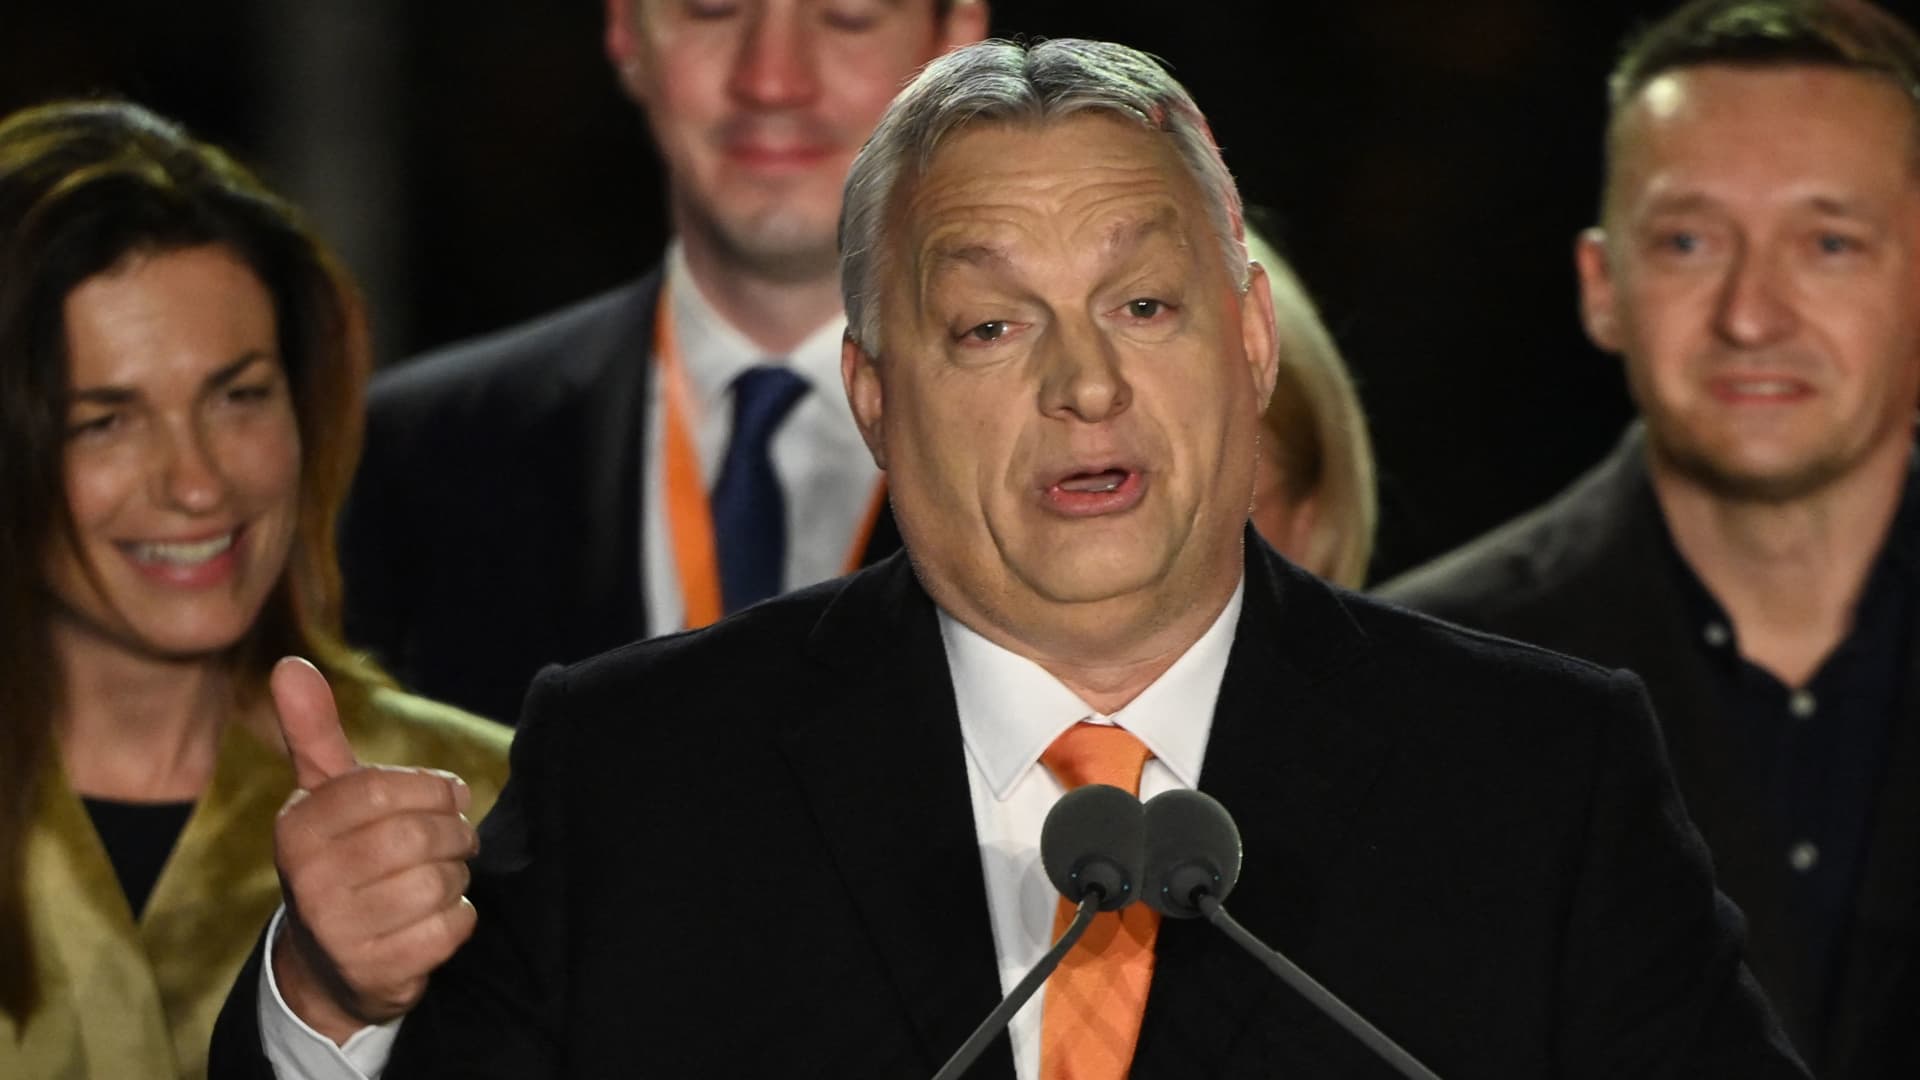 Hungary’s nationalist leader Orban criticizes Ukraine’s Zelenskyy in election victory speech – CNBC